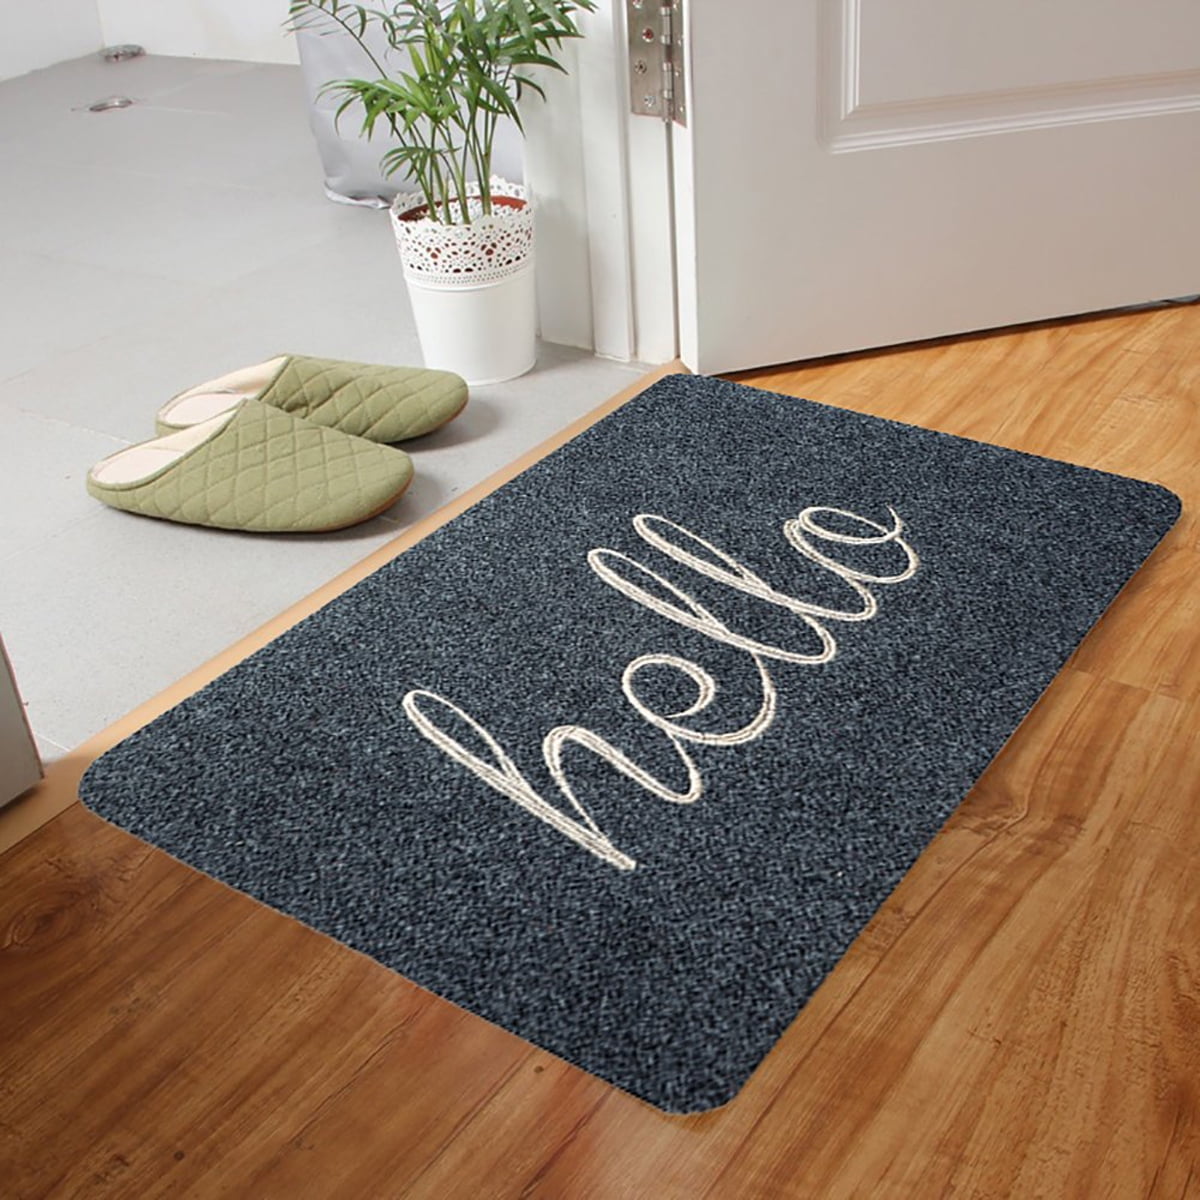 All Weather Entrance Rug Non-Skid Home Door Mat 16 x 24 Red Gold Lettering Welcome Rug 